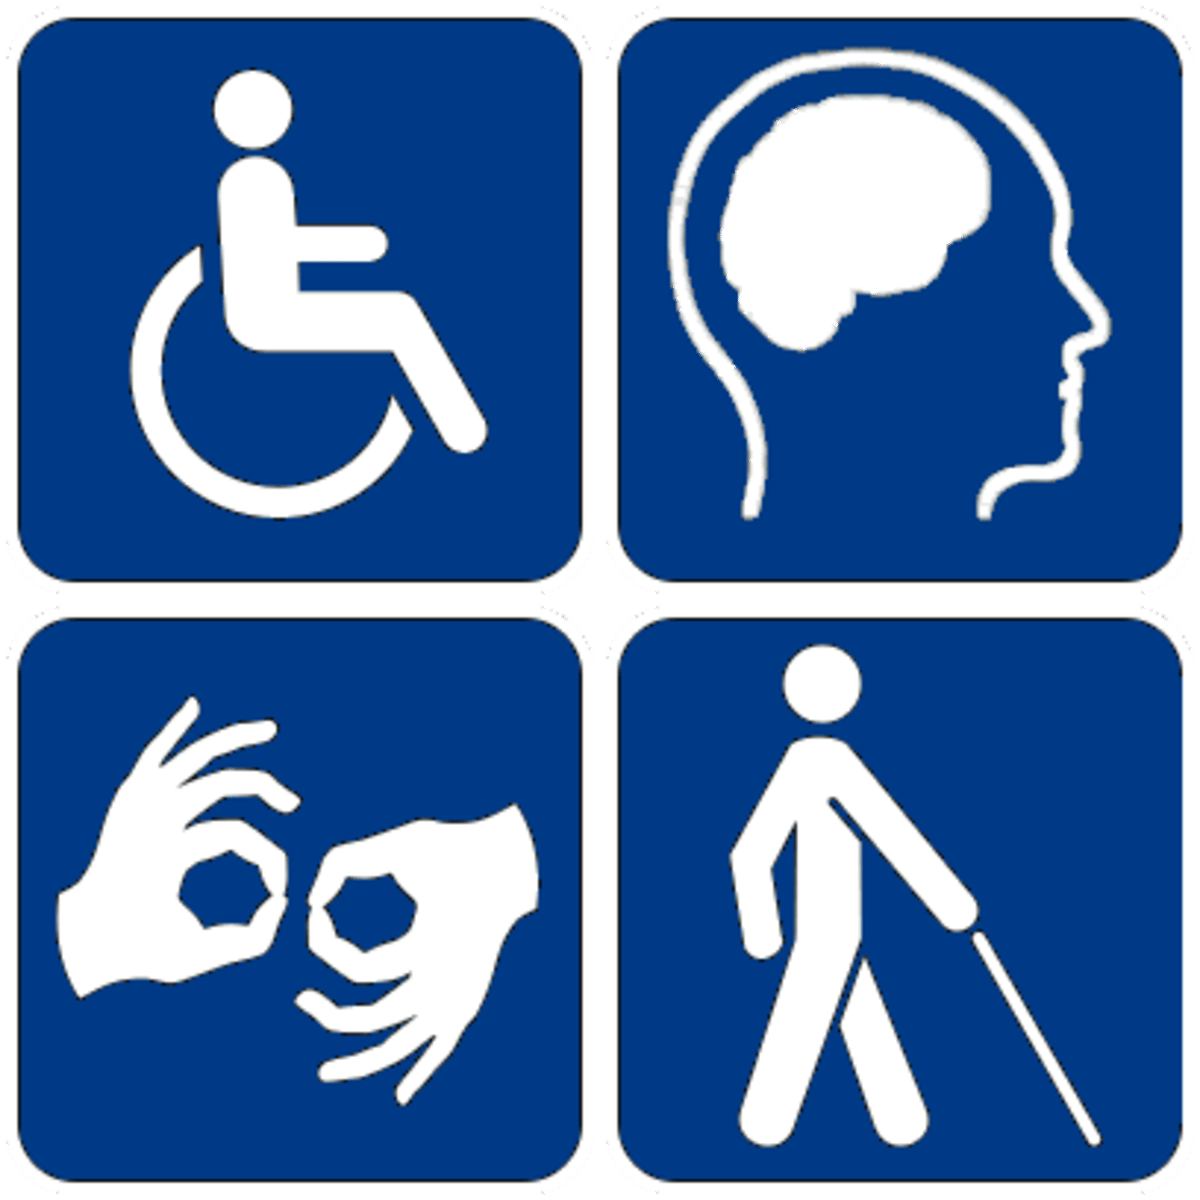 Political Correctness and People With Disabilities